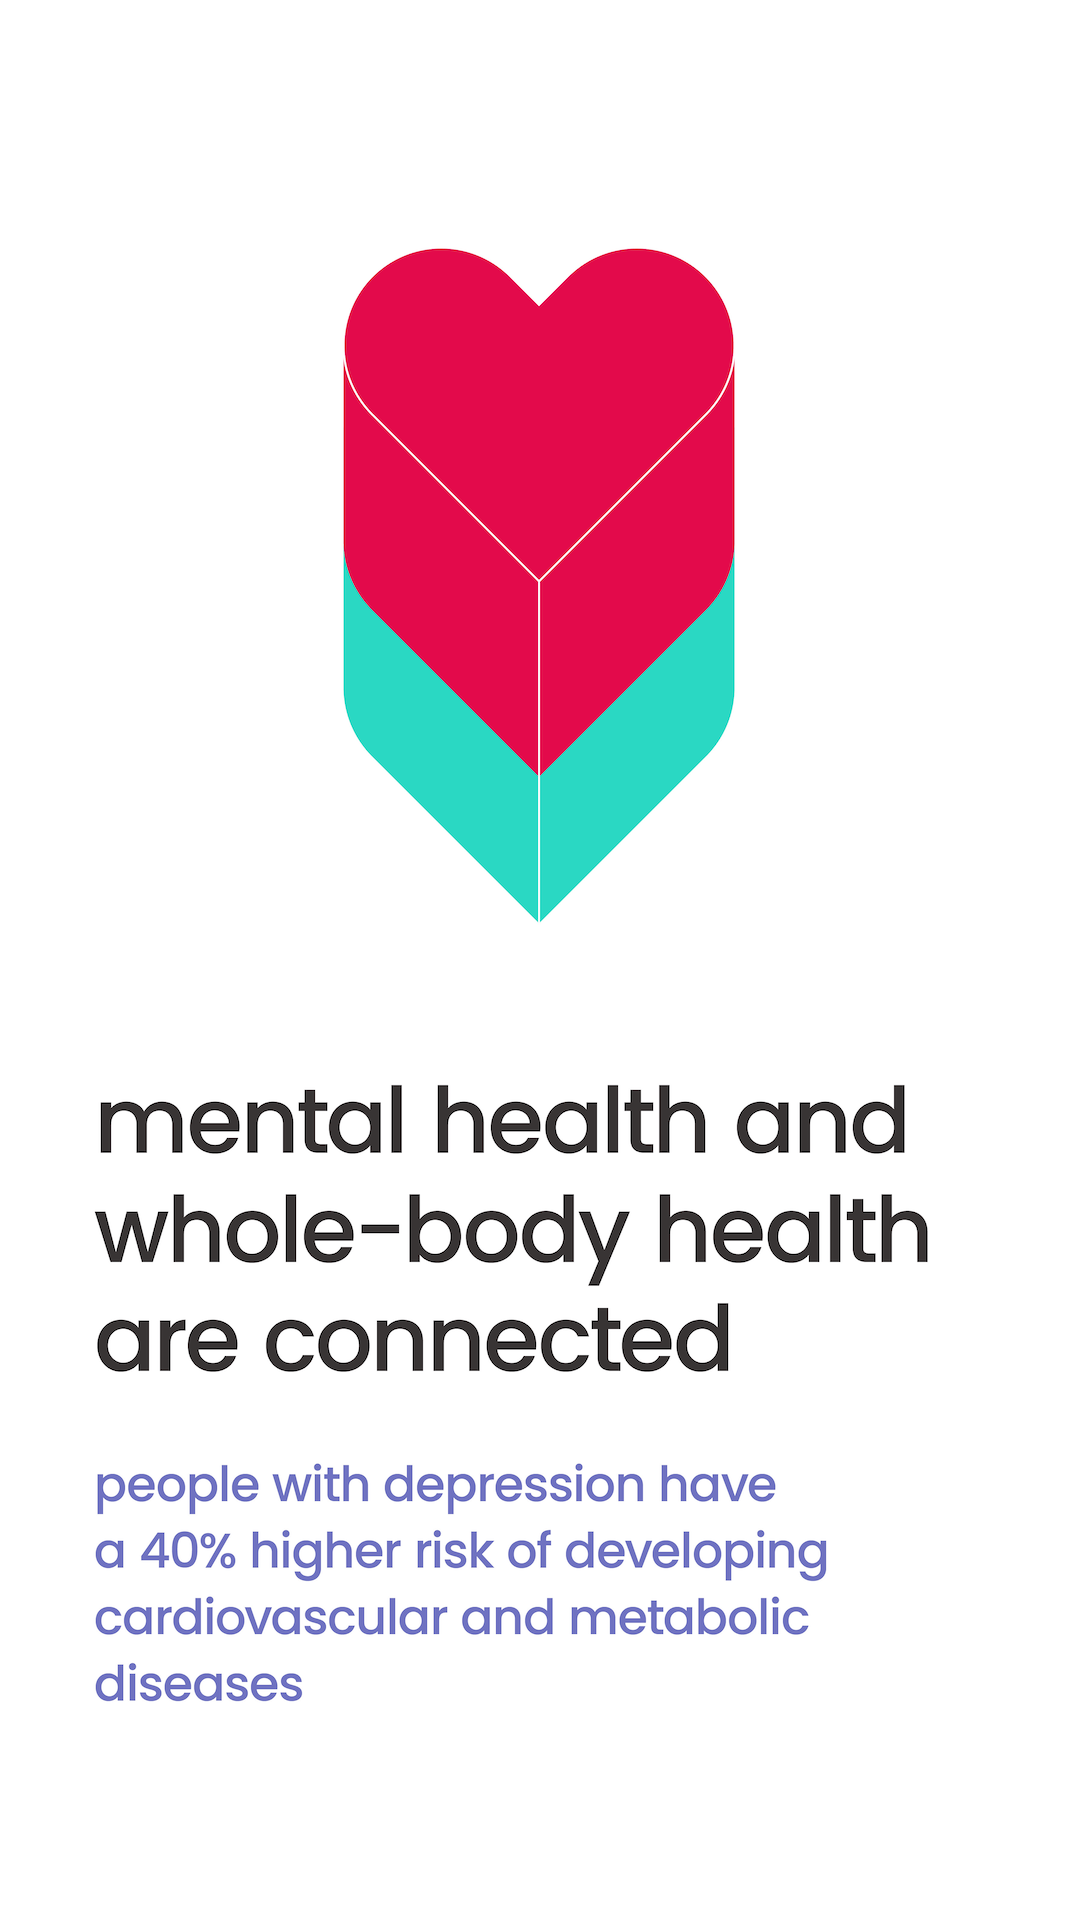 Mental Health and whole-body health are connected. People with depression have a 40% higher risk of developing cardiovascular and metabolic diseases. 